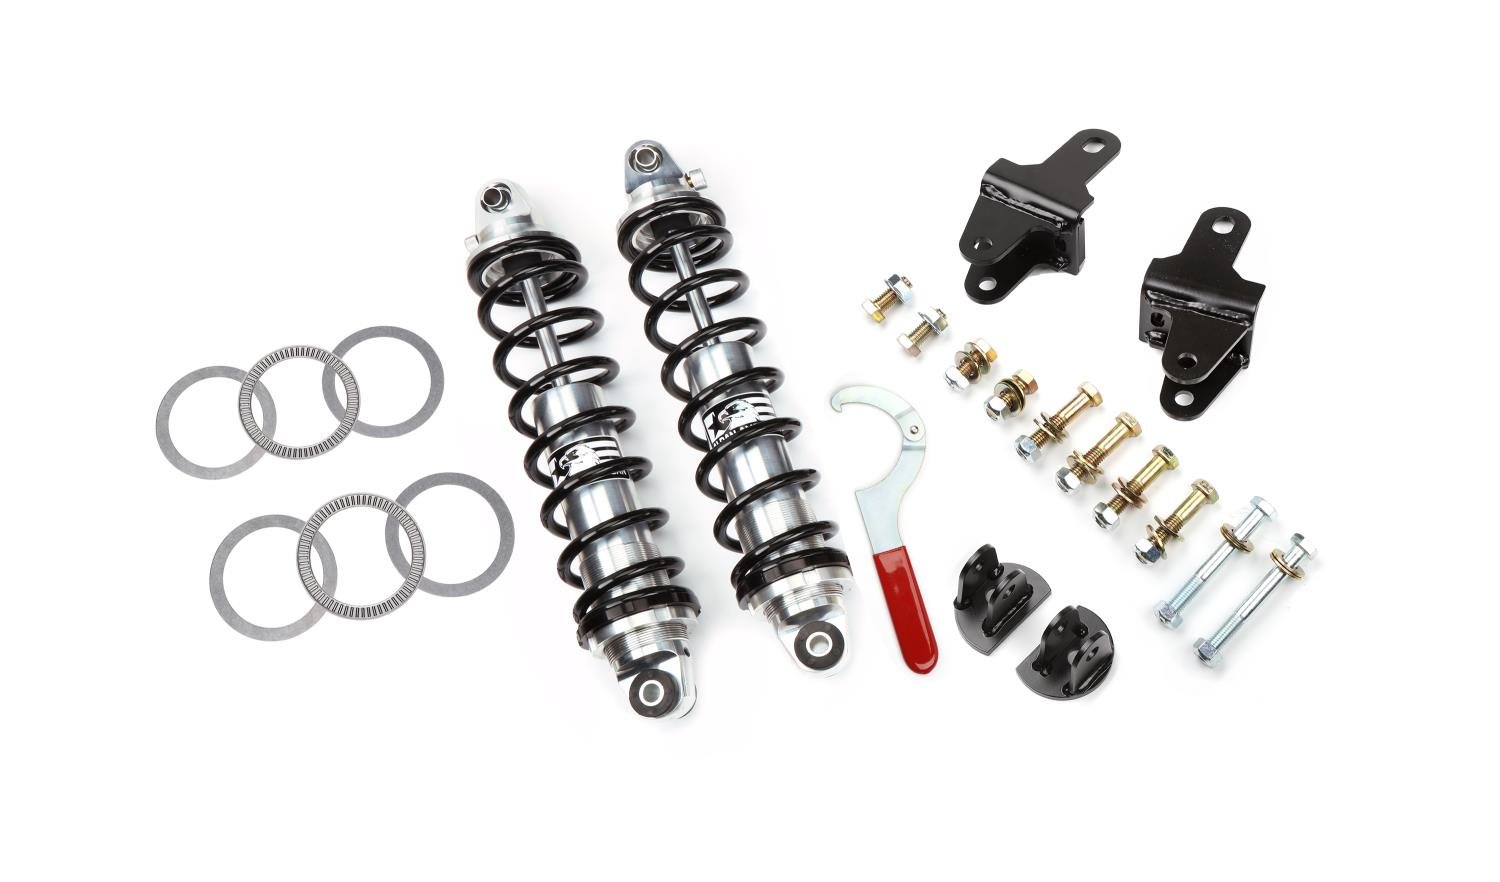 Road Comp Series Rear Coilover Conversion Kit 1979-2004 Ford Mustang, Single-Adjustable [140 lbs./in. Springs]